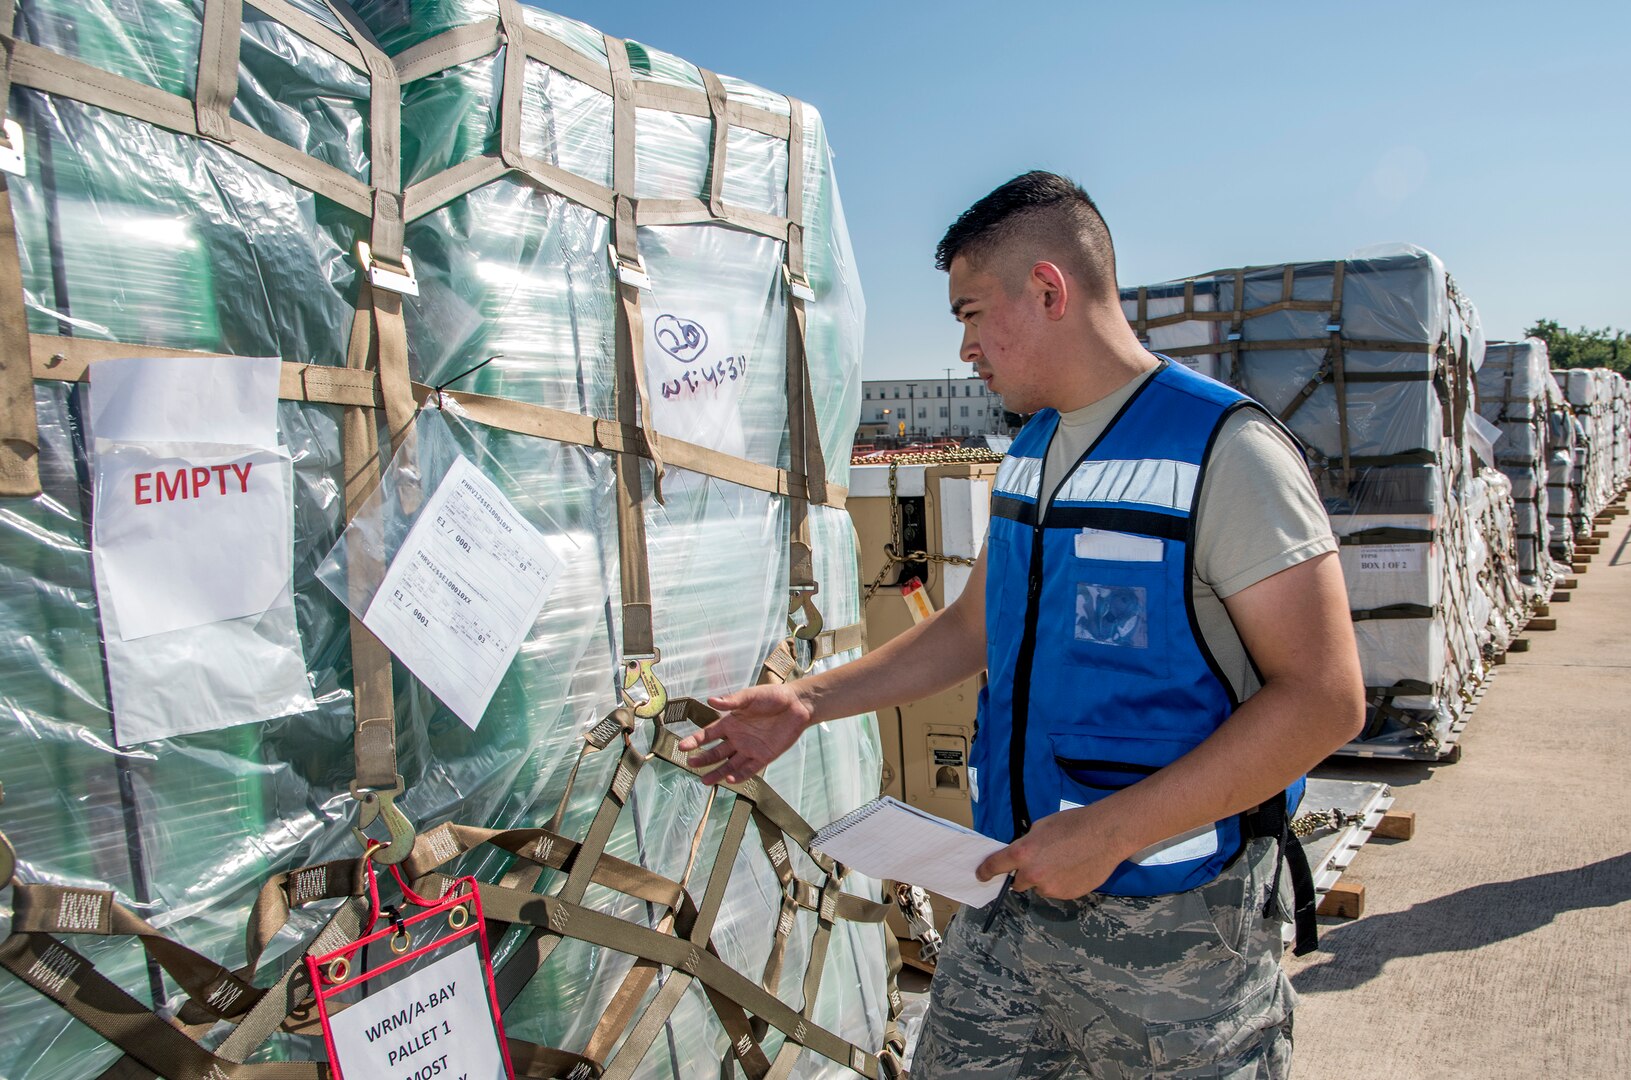 Senior Airman Jorge Gonzalez, 502nd Logistics Readiness Squadron, matches paperwork to pallets loaded with medical supplies and equipment Aug. 30, 2017 at Joint Base San Antonio-Lackland, Texas.